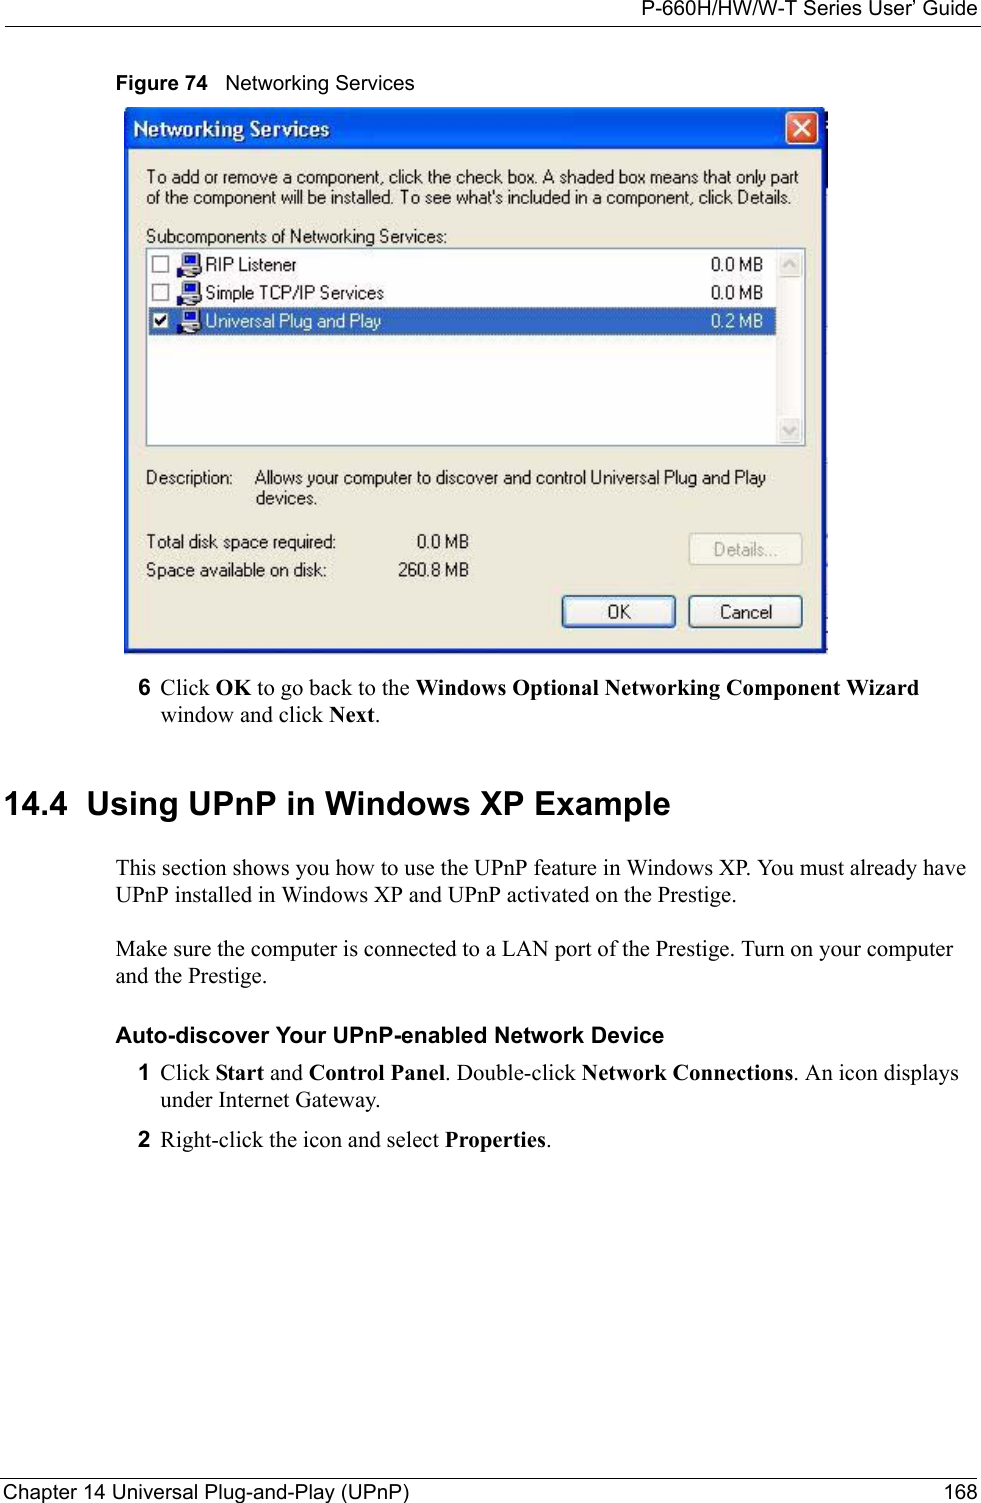 P-660H/HW/W-T Series User’ GuideChapter 14 Universal Plug-and-Play (UPnP) 168Figure 74   Networking Services6Click OK to go back to the Windows Optional Networking Component Wizard window and click Next. 14.4  Using UPnP in Windows XP ExampleThis section shows you how to use the UPnP feature in Windows XP. You must already have UPnP installed in Windows XP and UPnP activated on the Prestige.Make sure the computer is connected to a LAN port of the Prestige. Turn on your computer and the Prestige. Auto-discover Your UPnP-enabled Network Device1Click Start and Control Panel. Double-click Network Connections. An icon displays under Internet Gateway.2Right-click the icon and select Properties. 